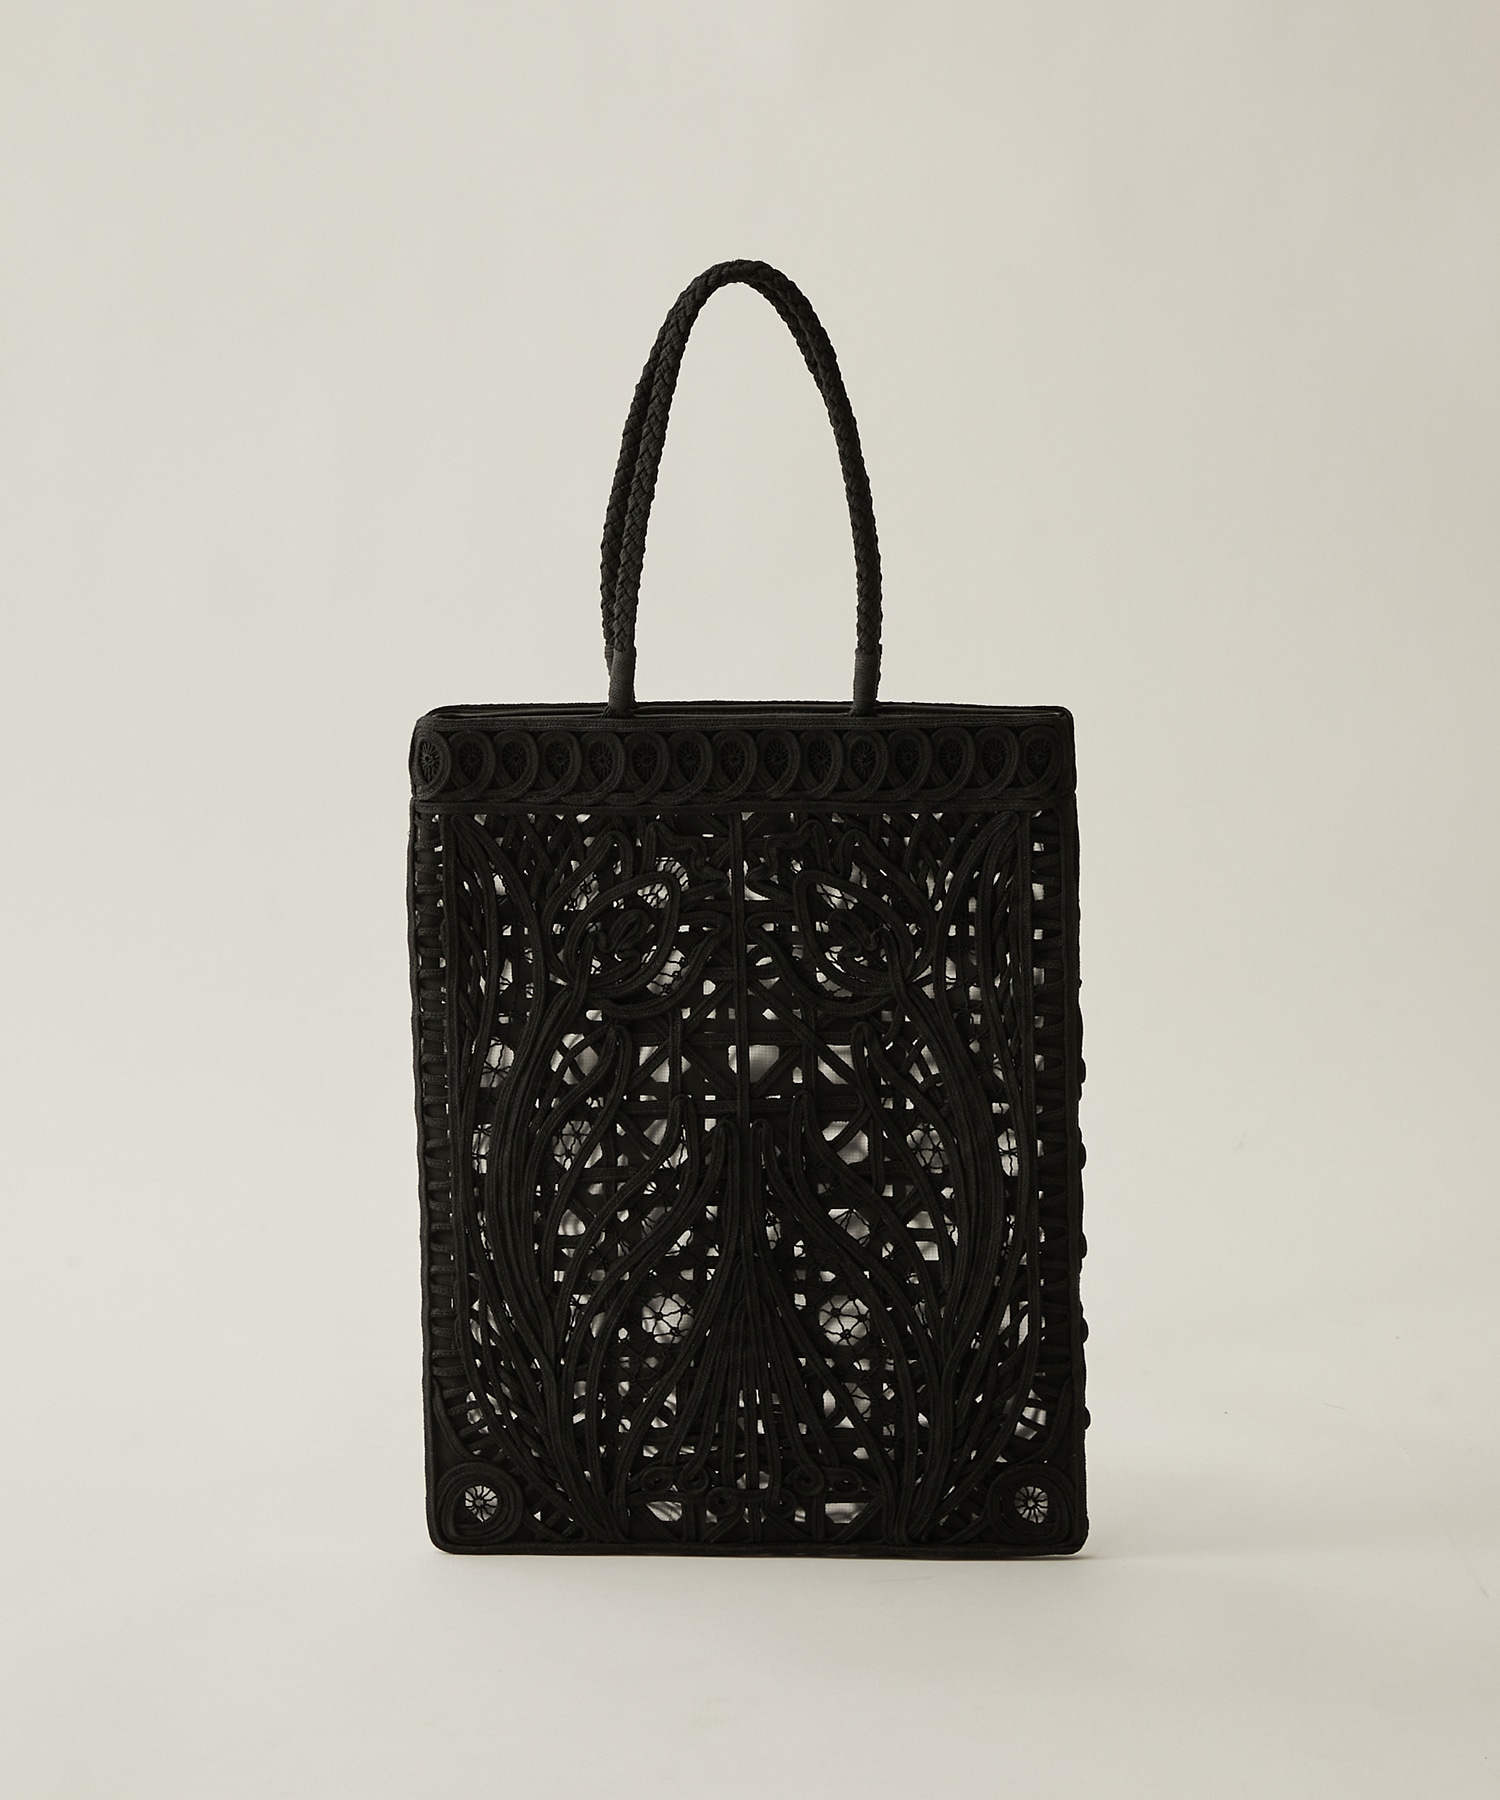 Cording Embroidery Tote Bag - black